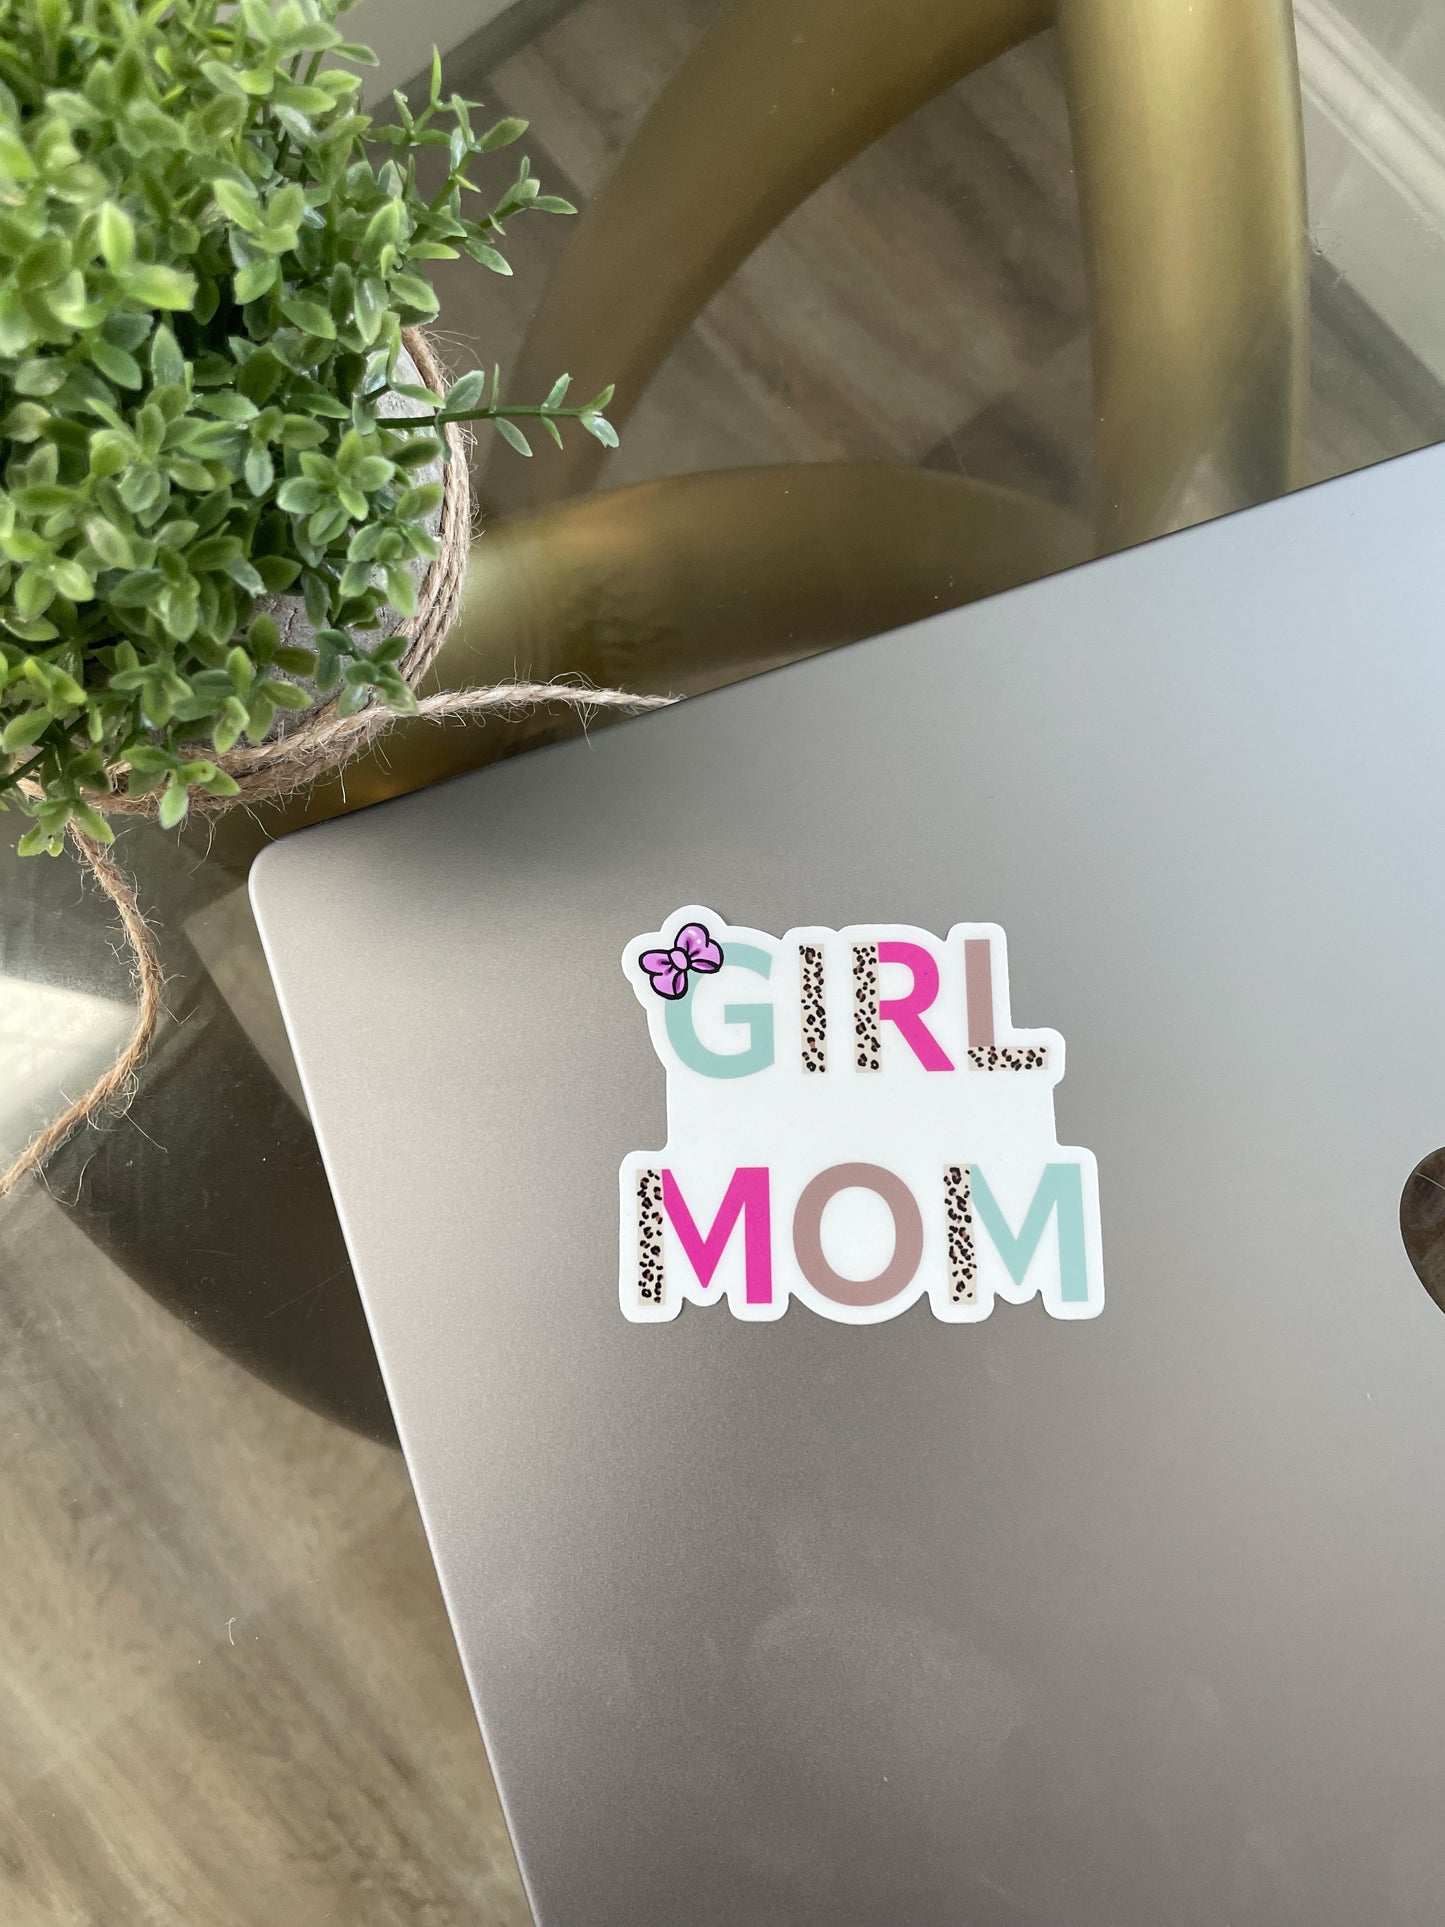 girl mom sticker pictured on laptop